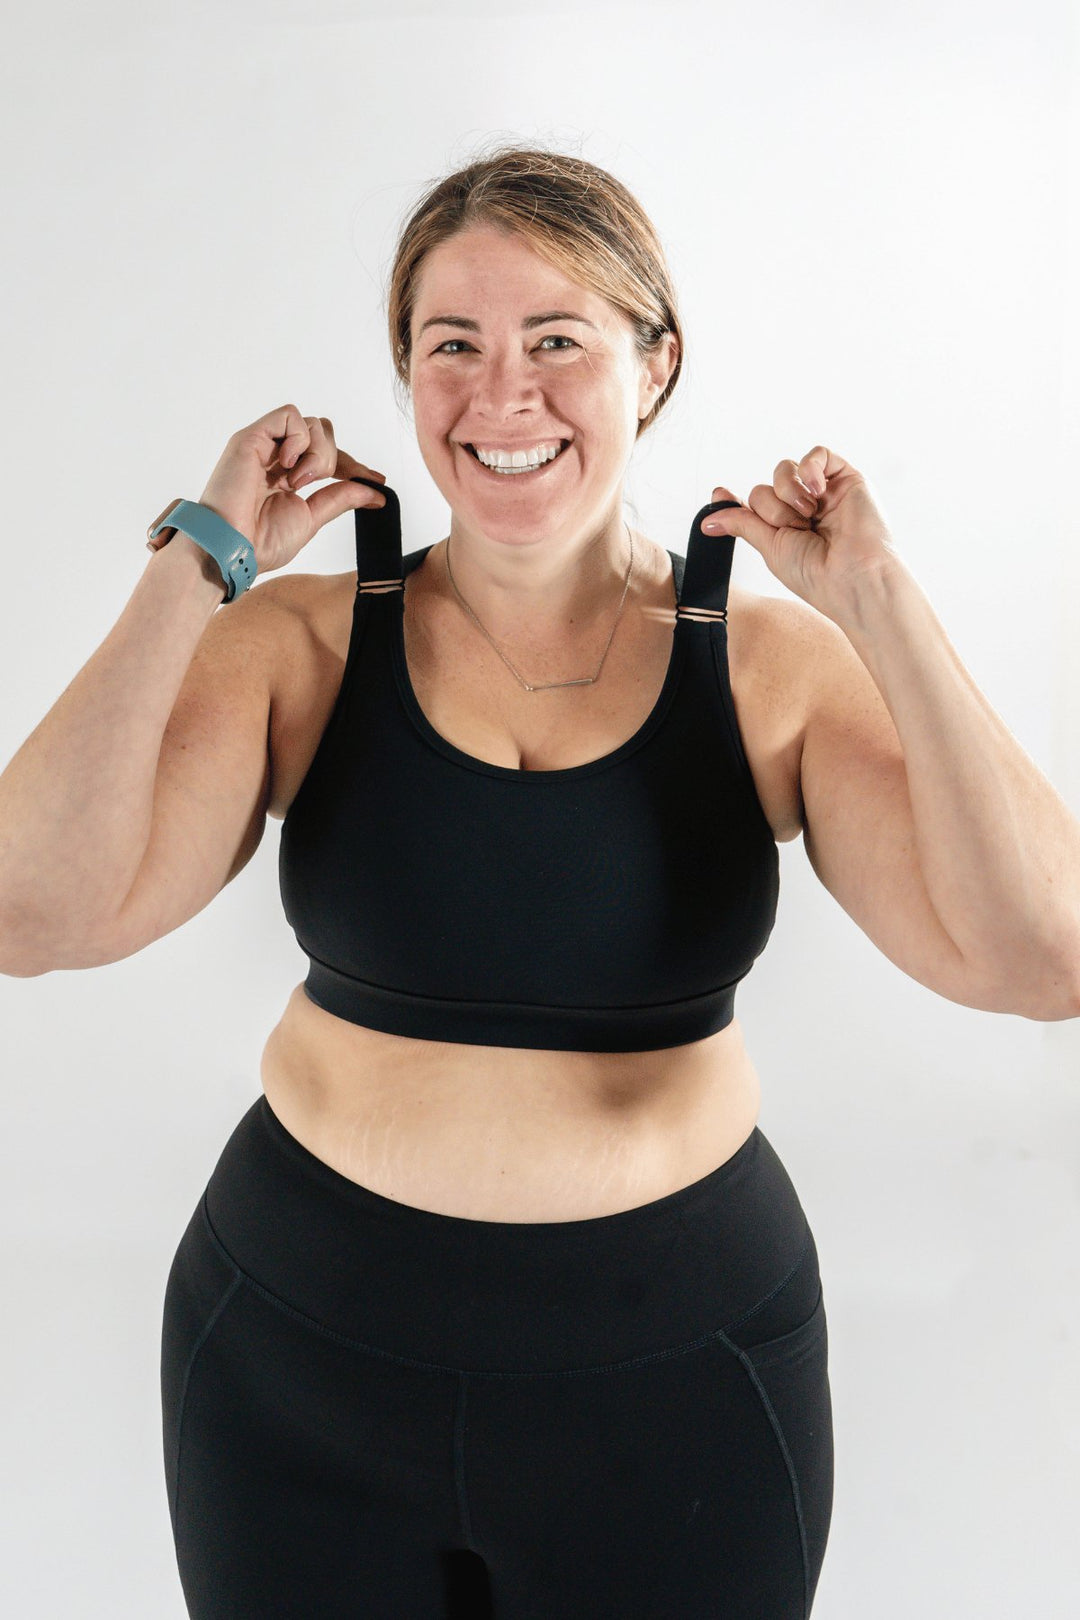 Mum shares the sports bra that supports her large breasts for running –  SportsBra